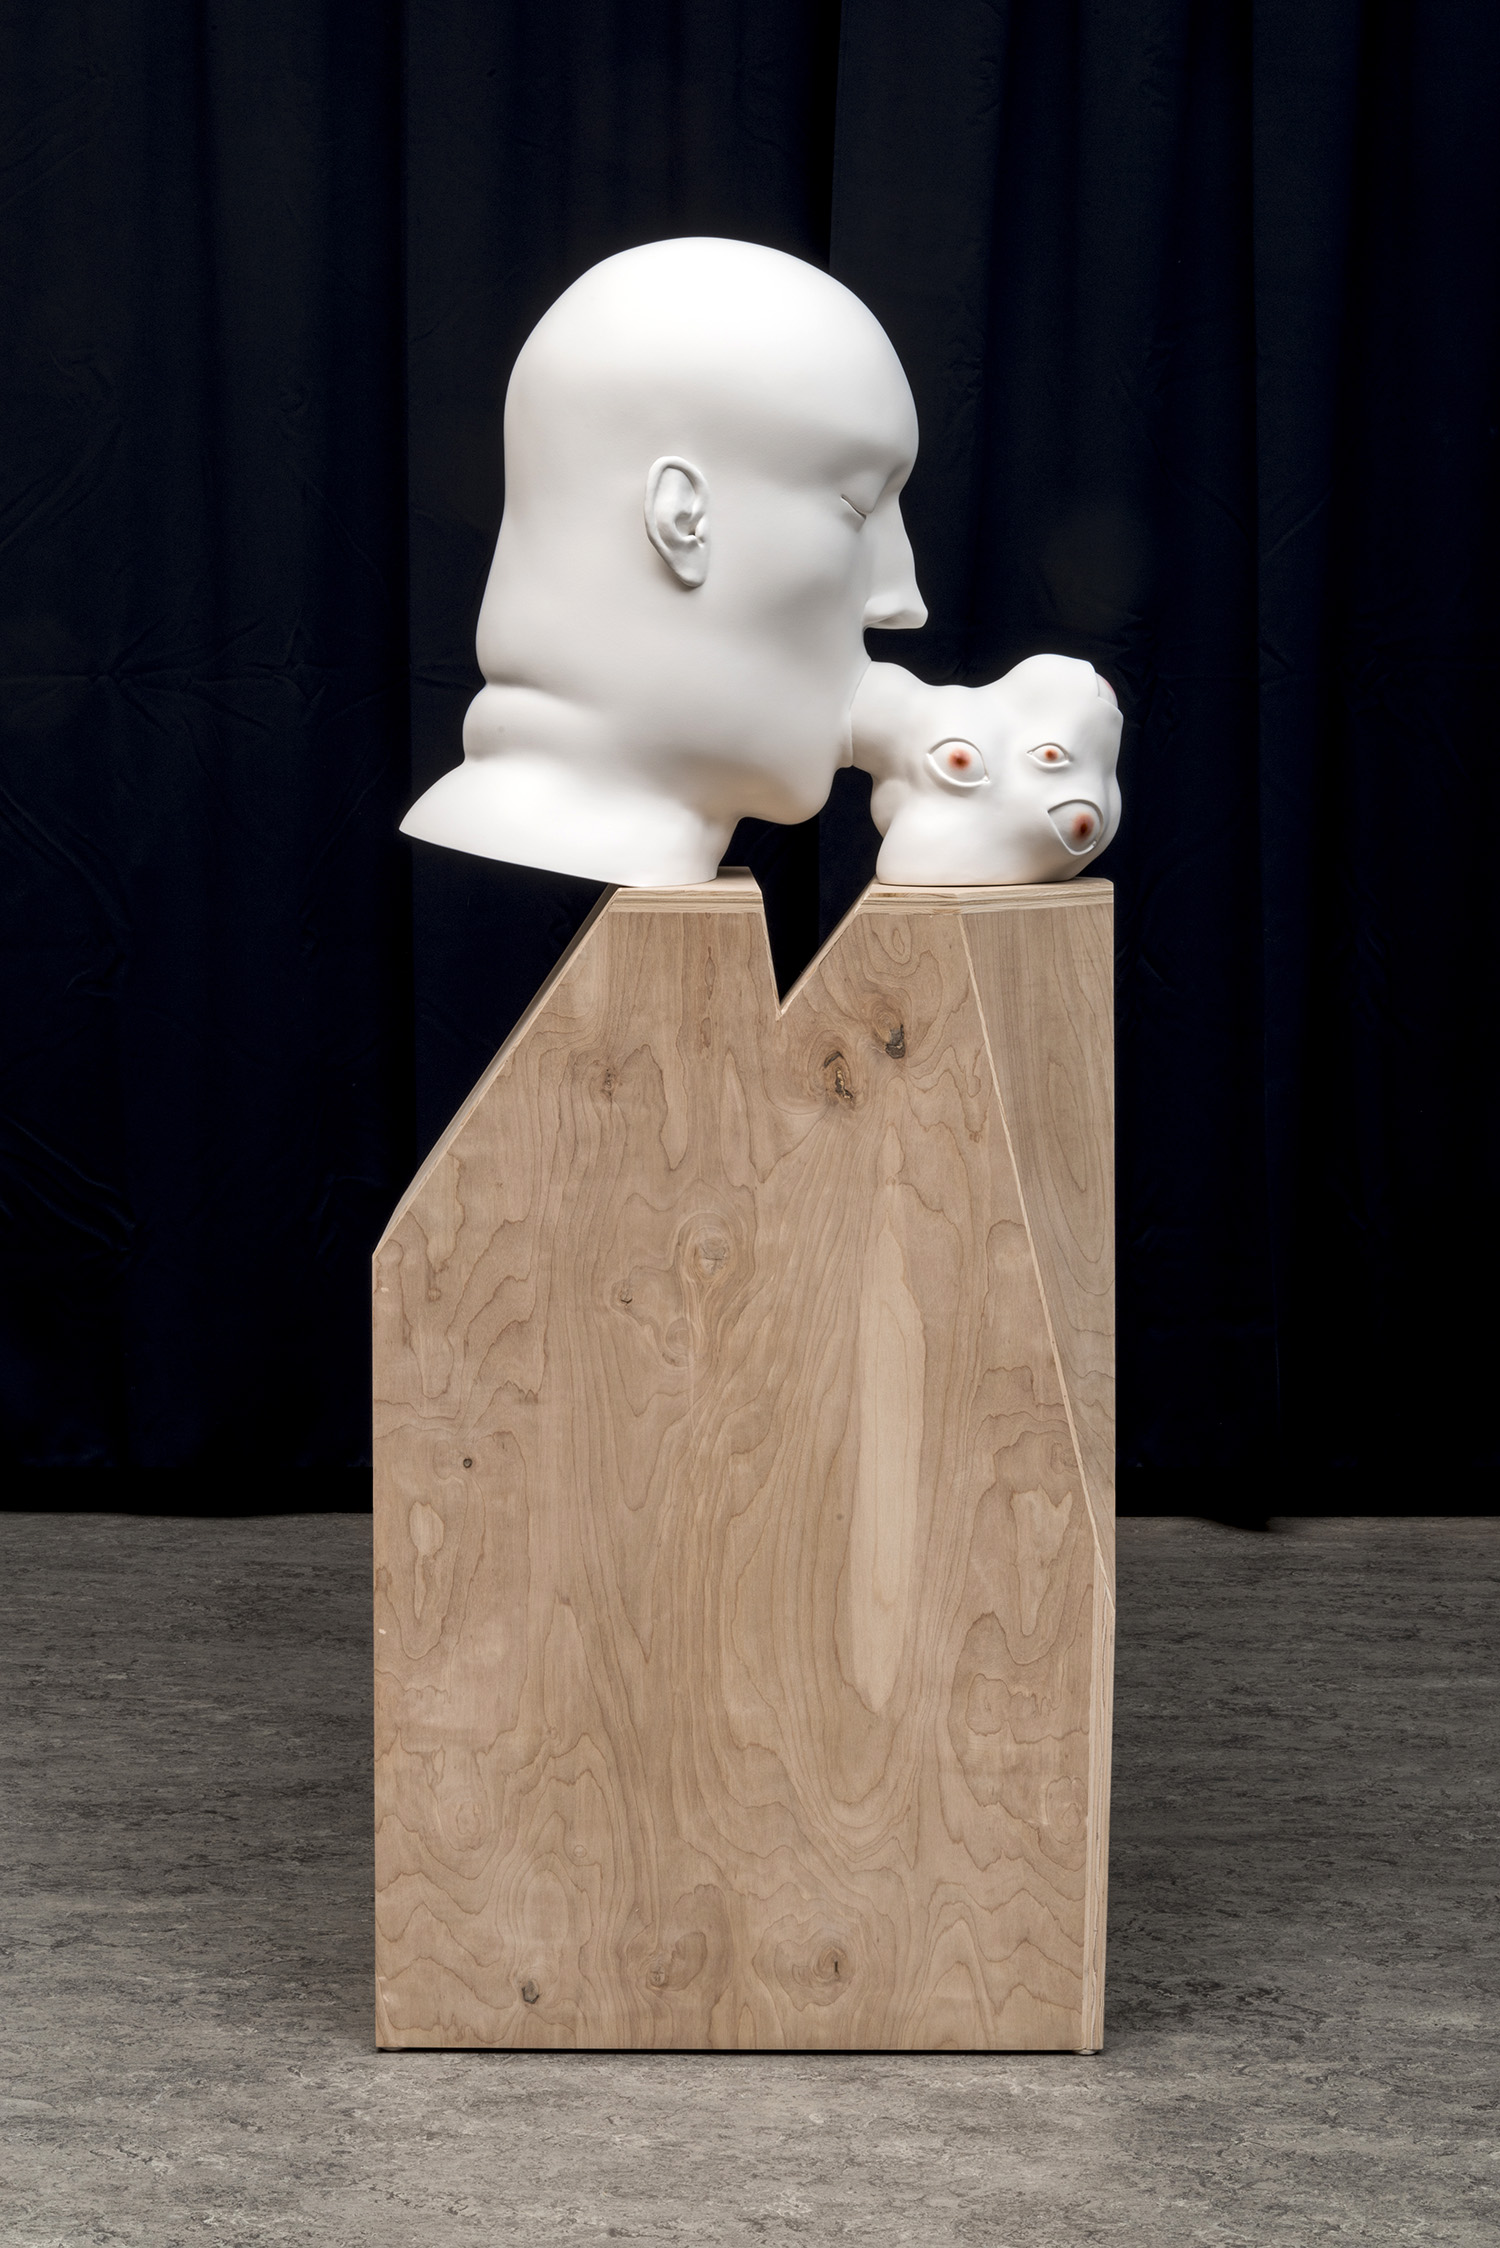    
  
 
  
     Tanya Batura  Untitled (head blob)  2014 clay, acrylic 21 x 11 x 24 inches 60 x 13 x 24 inches with pedestal Courtesy of 101/Exhibit   Photography: Alan Shaffer  